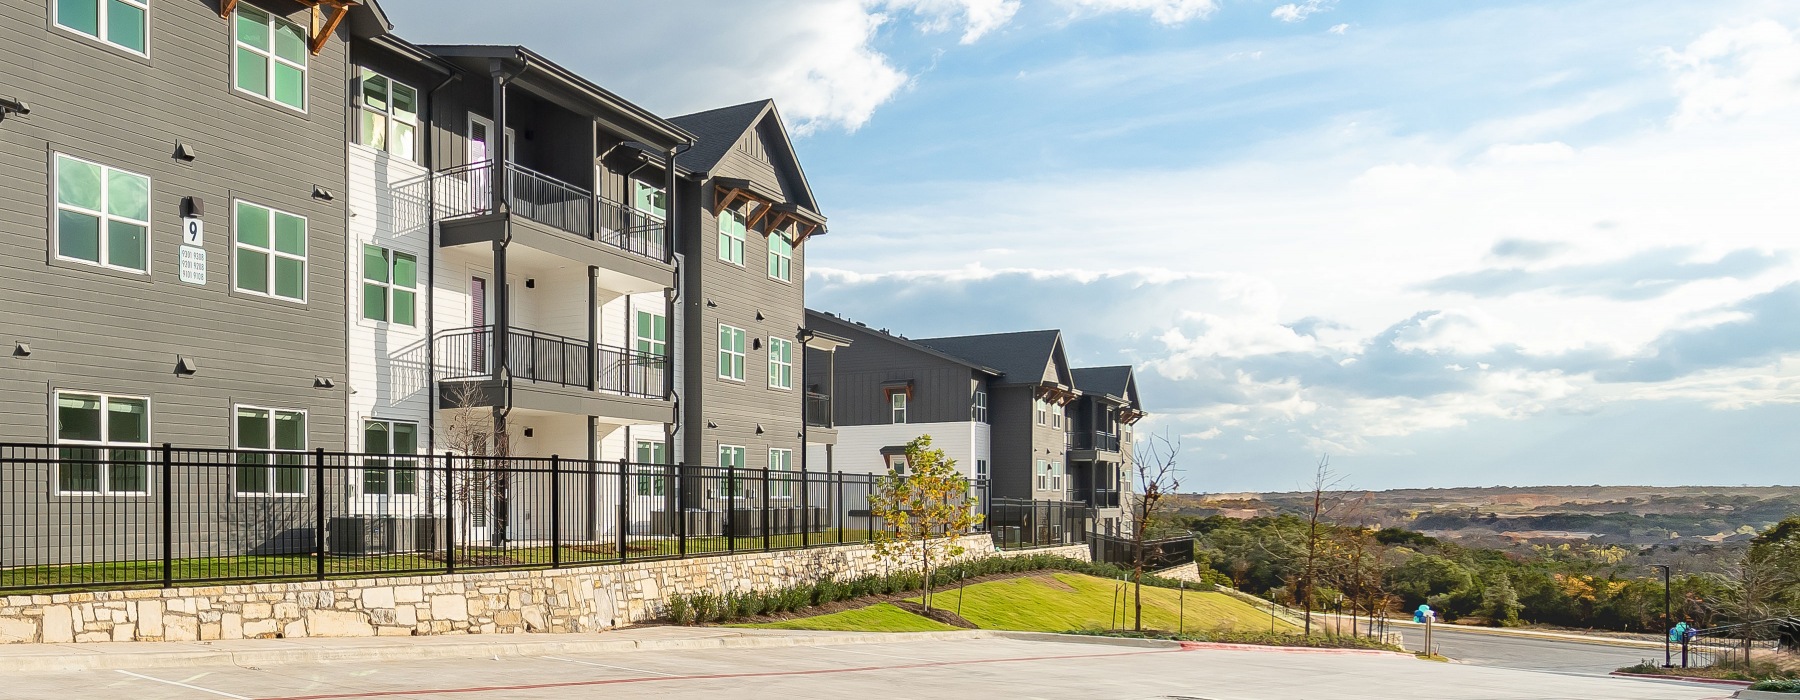 Apartment complex with hill country views